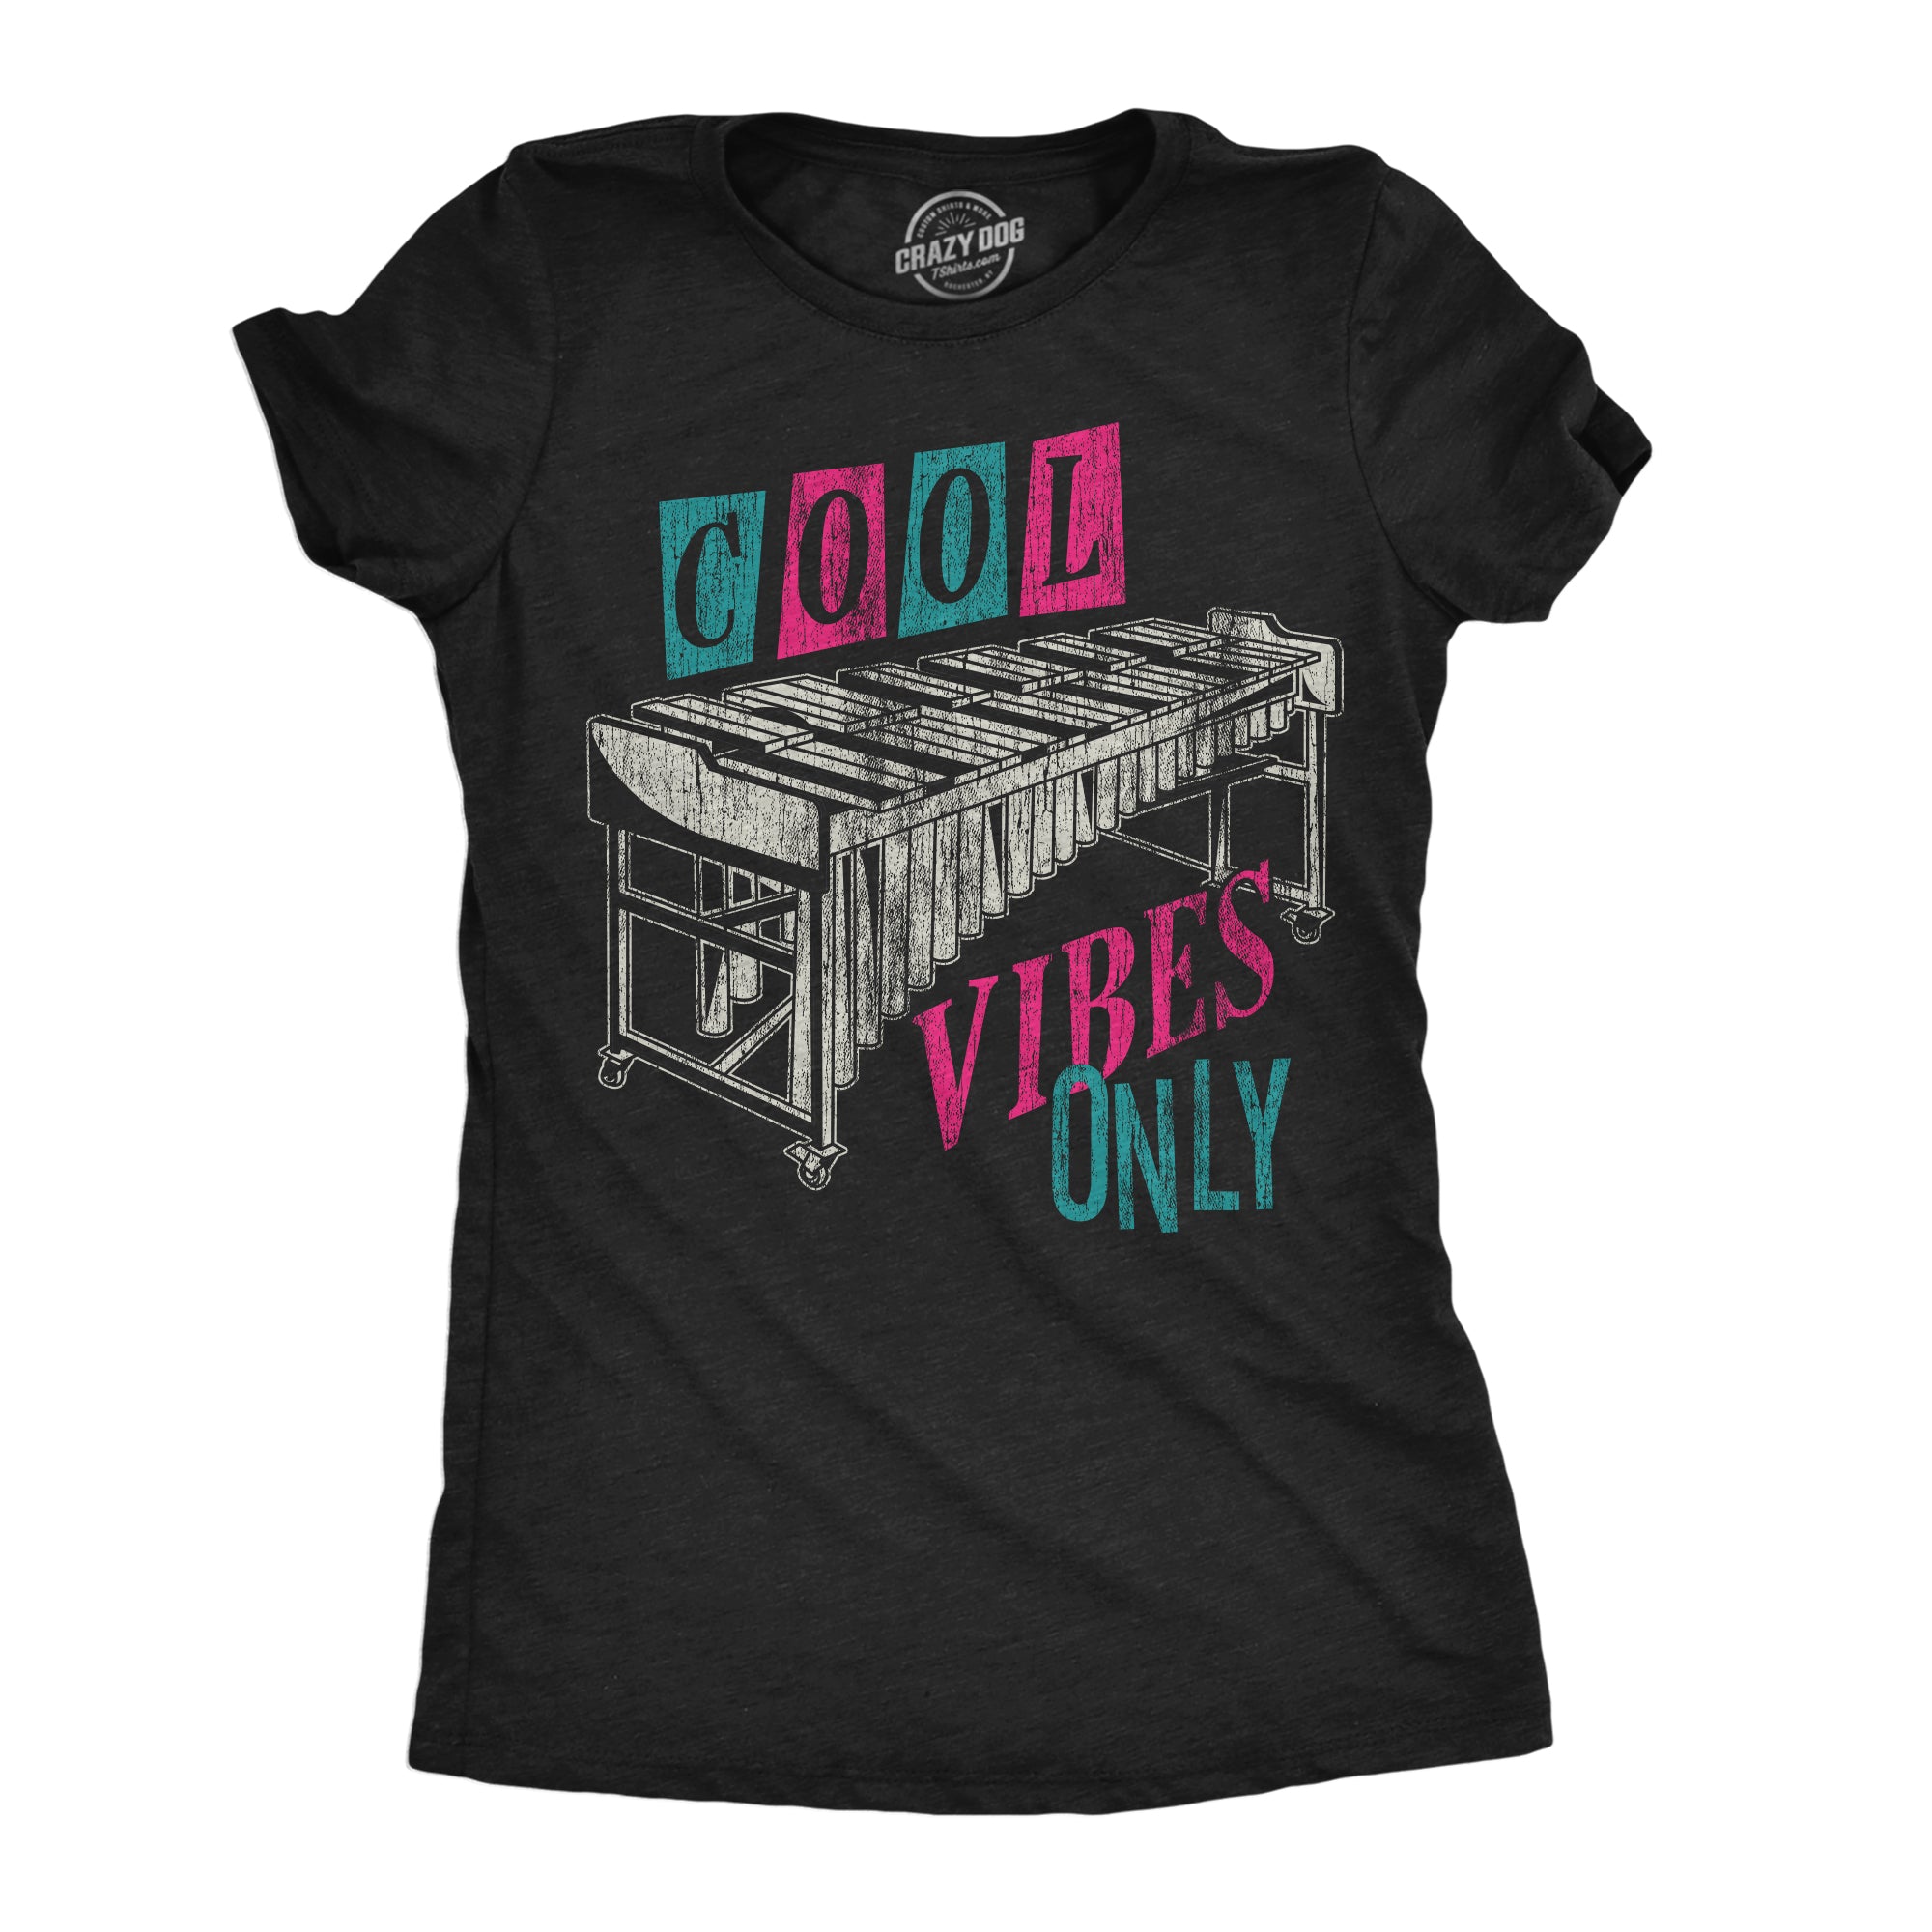 Funny Heather Black - Cool Vibes Only Cool Vibes Only Womens T Shirt Nerdy music sarcastic Tee